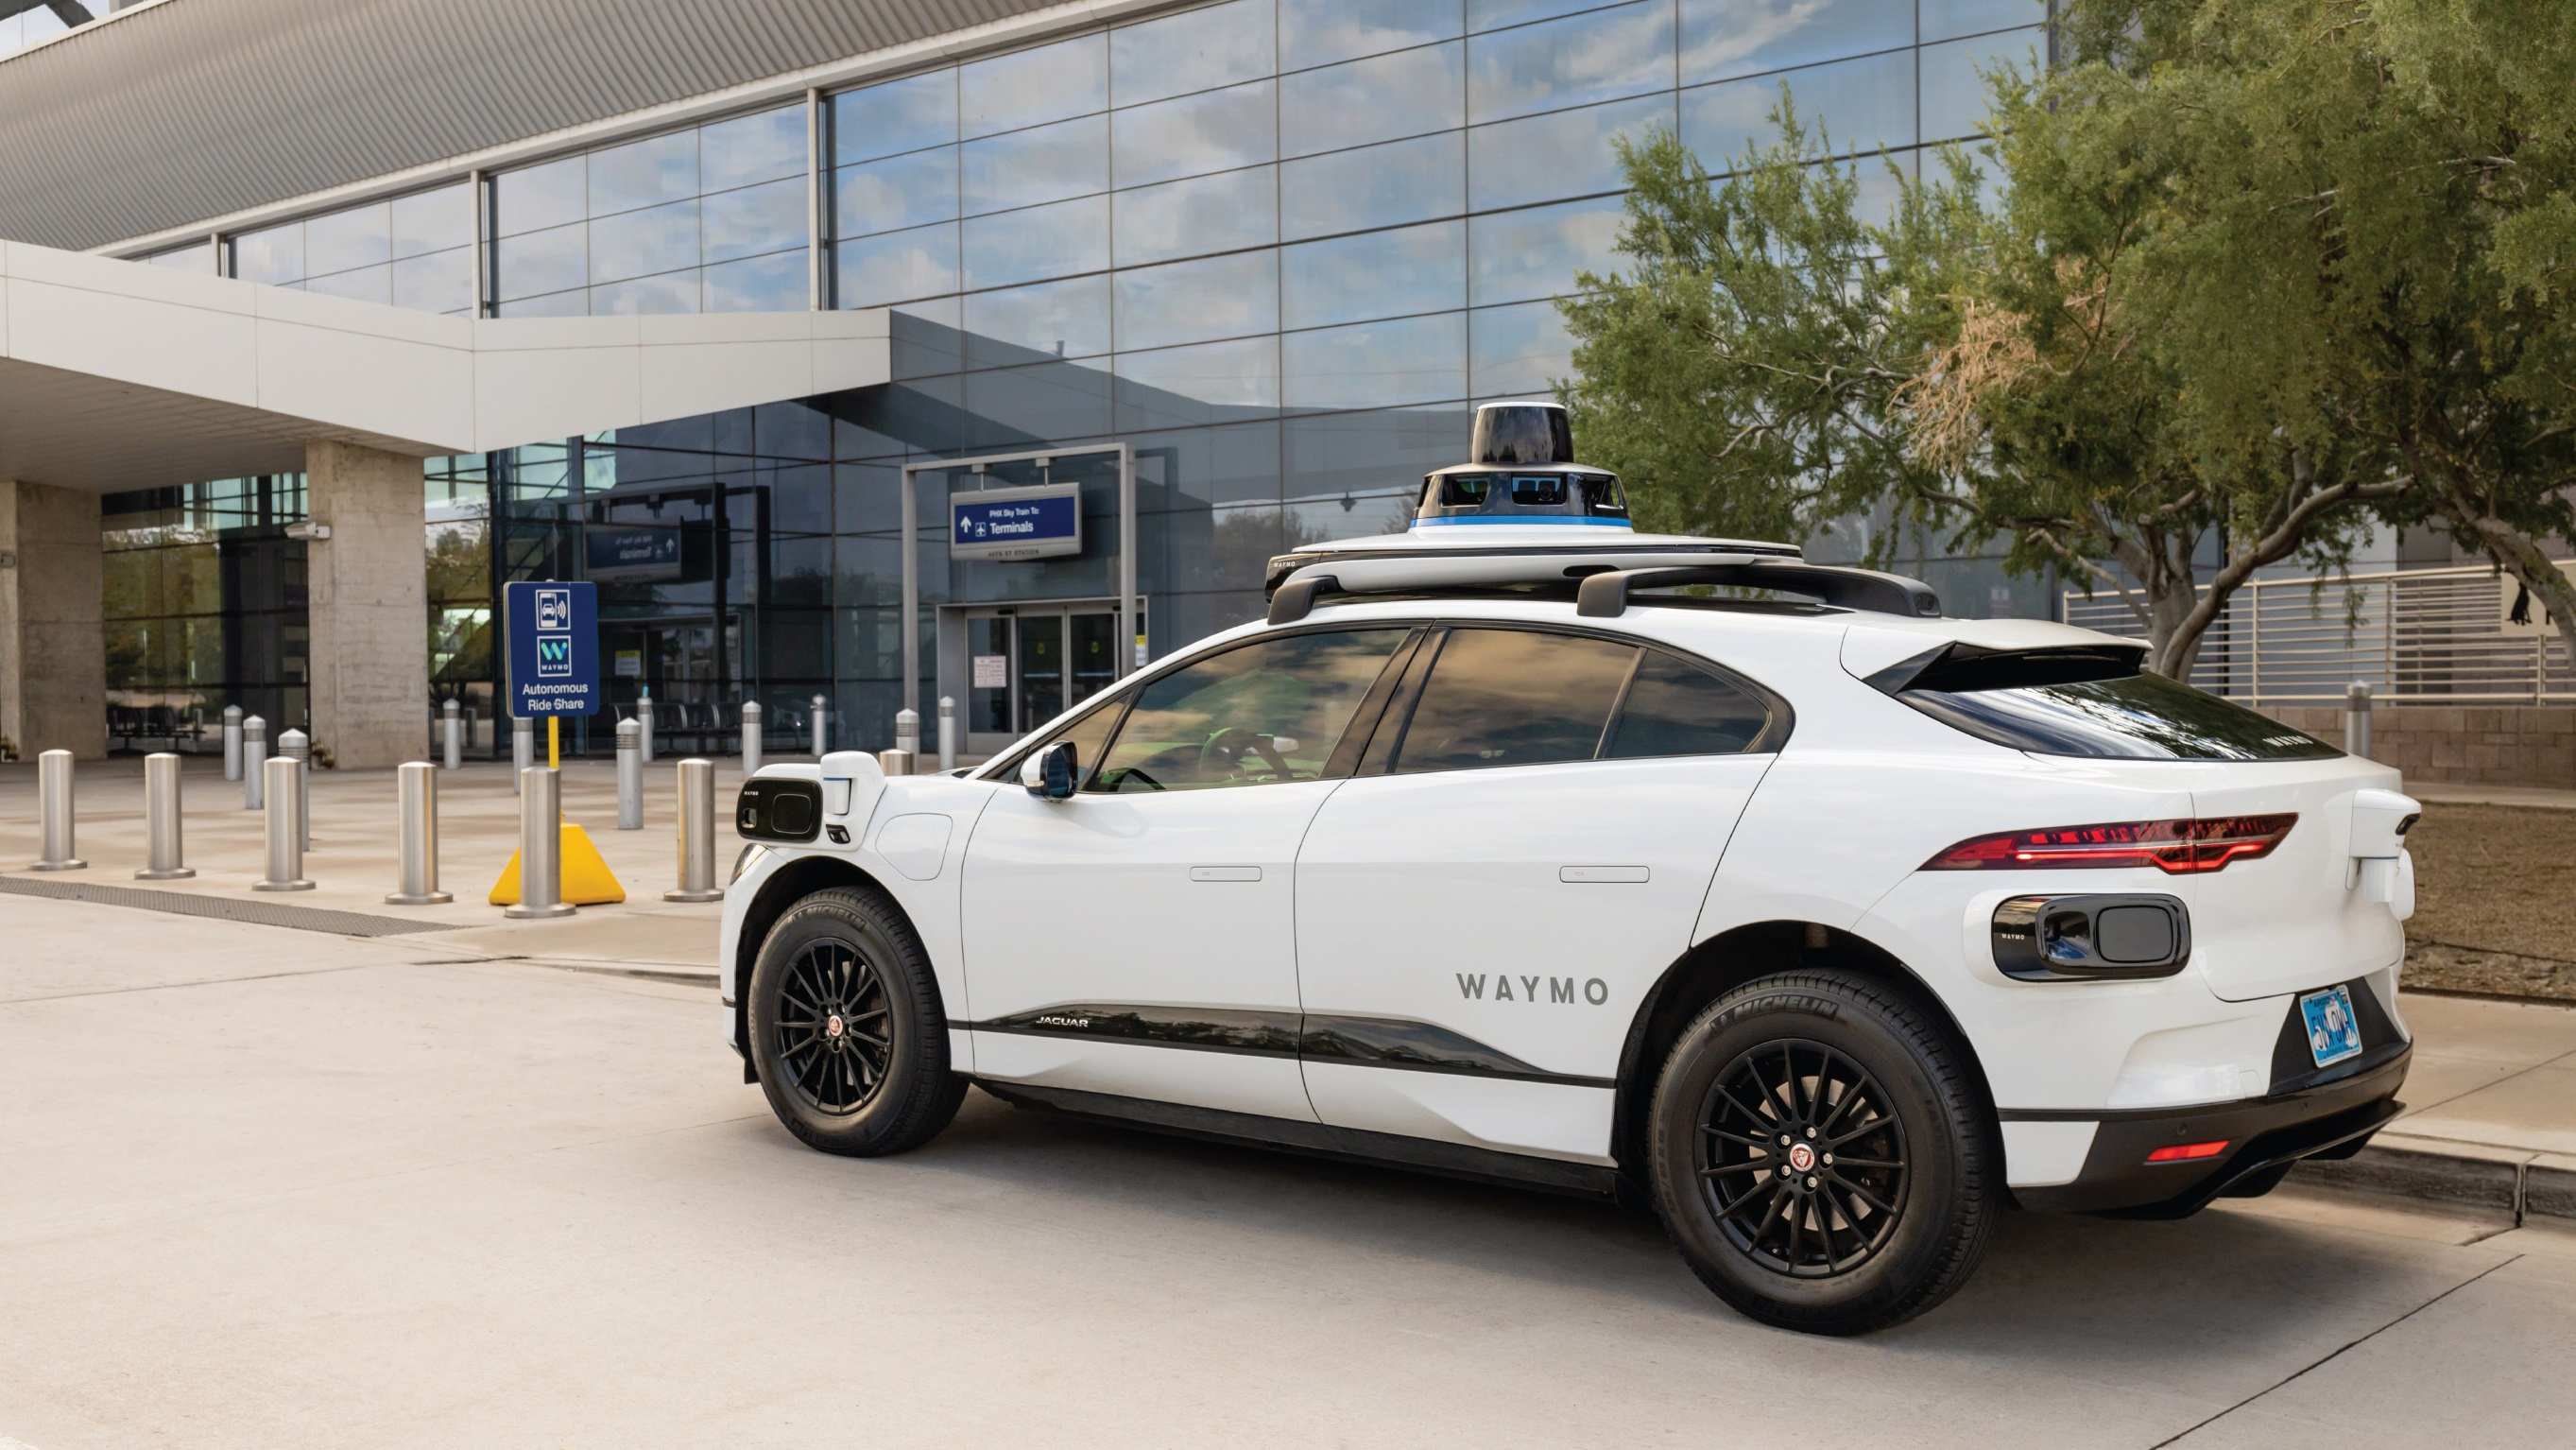 Waymo’s Curbside Robotaxi Pickup Service At Phoenix Airport